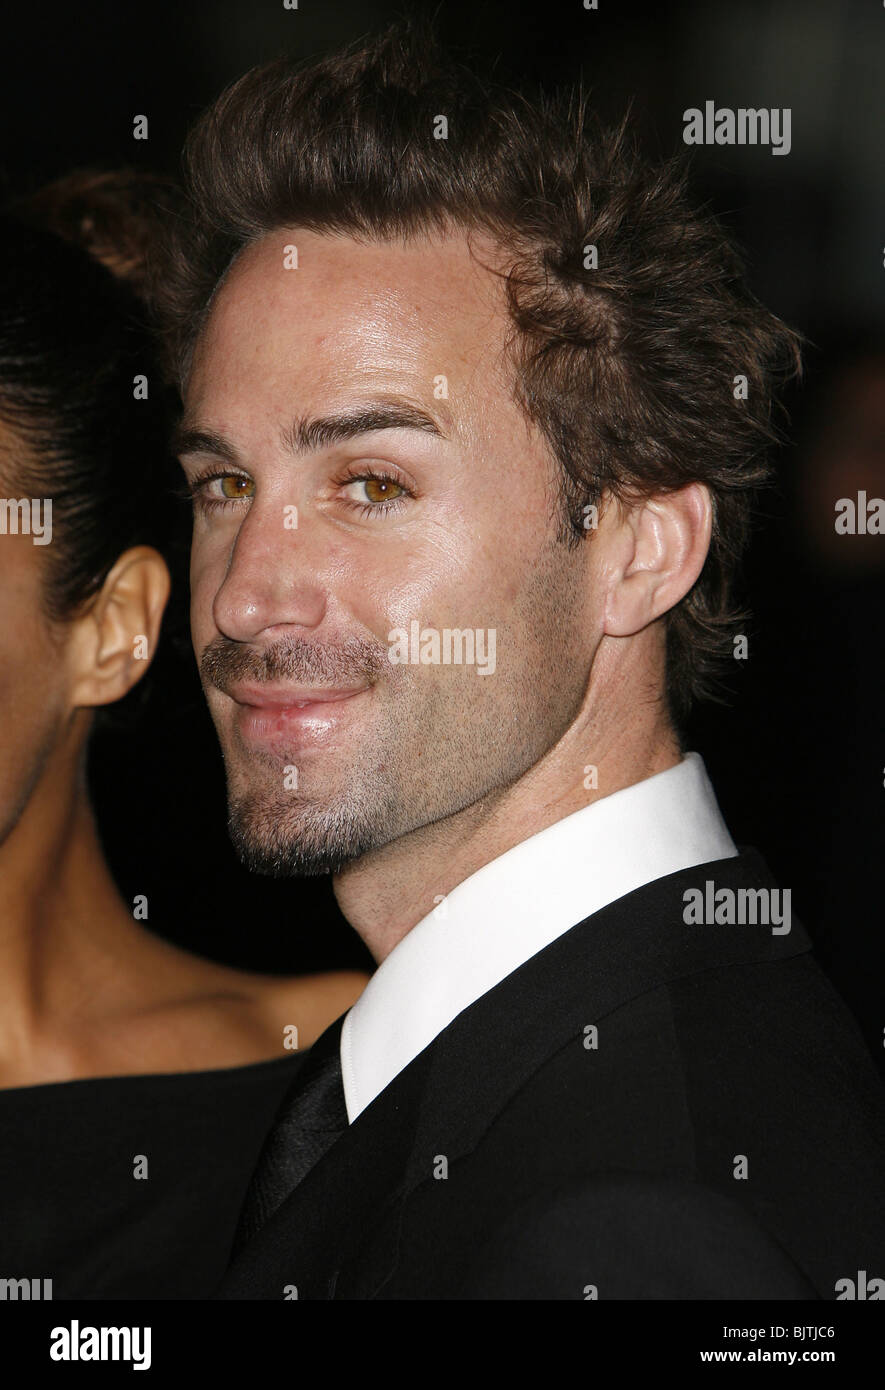 JOSEPH FIENNES THE LAST KING OF SCOTLAND UK PREMIER THE ODEON LEICESTER SQUARE LONDON 18 October 2006 Stock Photo